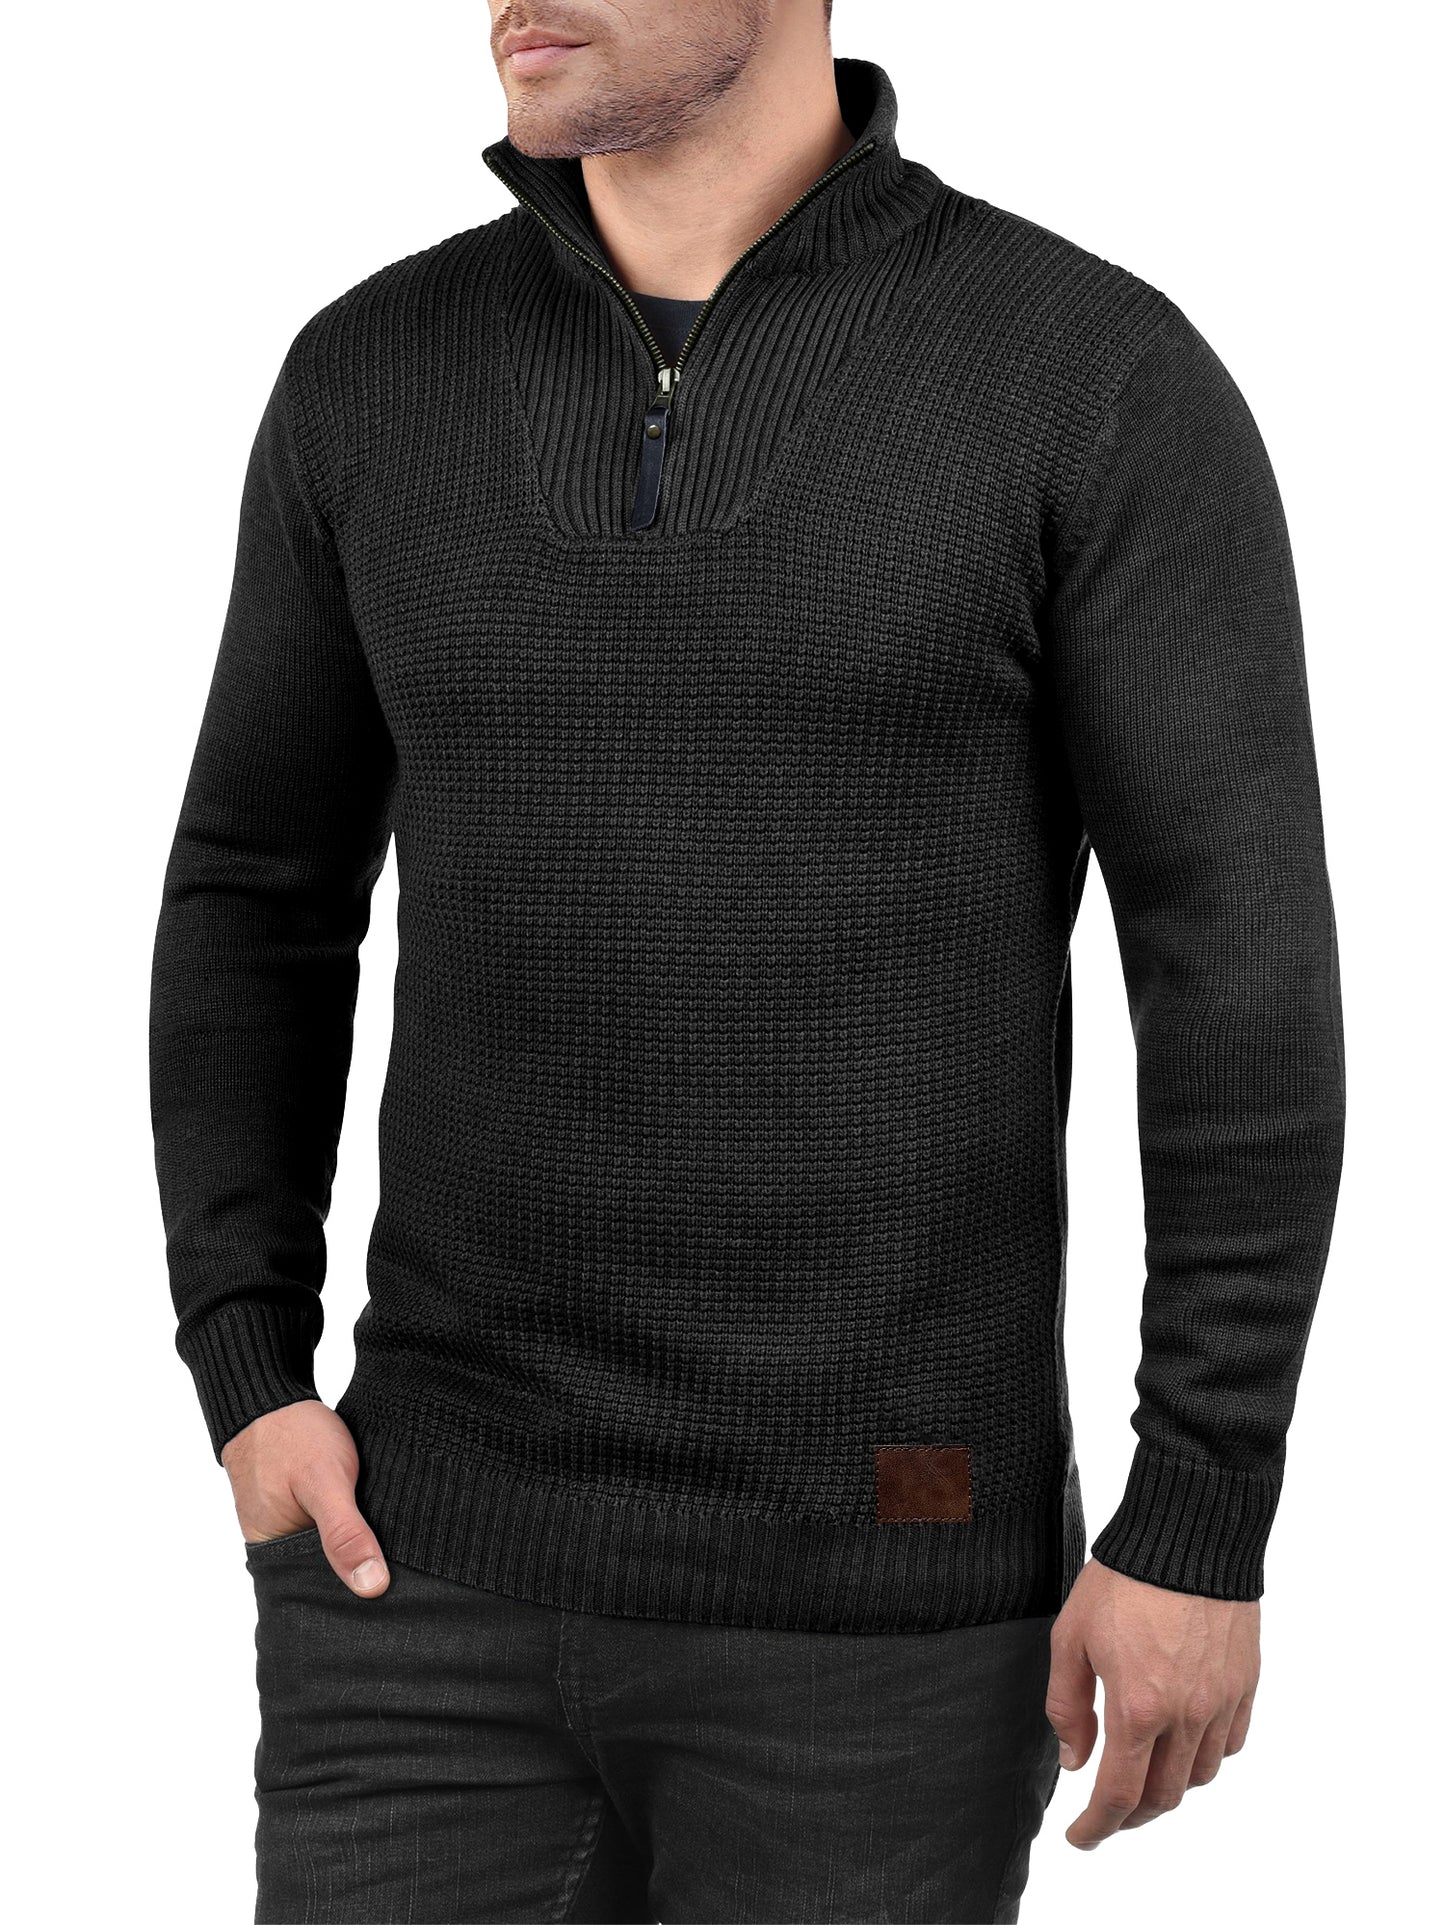 Comdecevis Men's Long-Sleeve Soft Touch Quarter-Zip Sweater Lightweight Turtleneck Pullover Casual Polo Sweaters